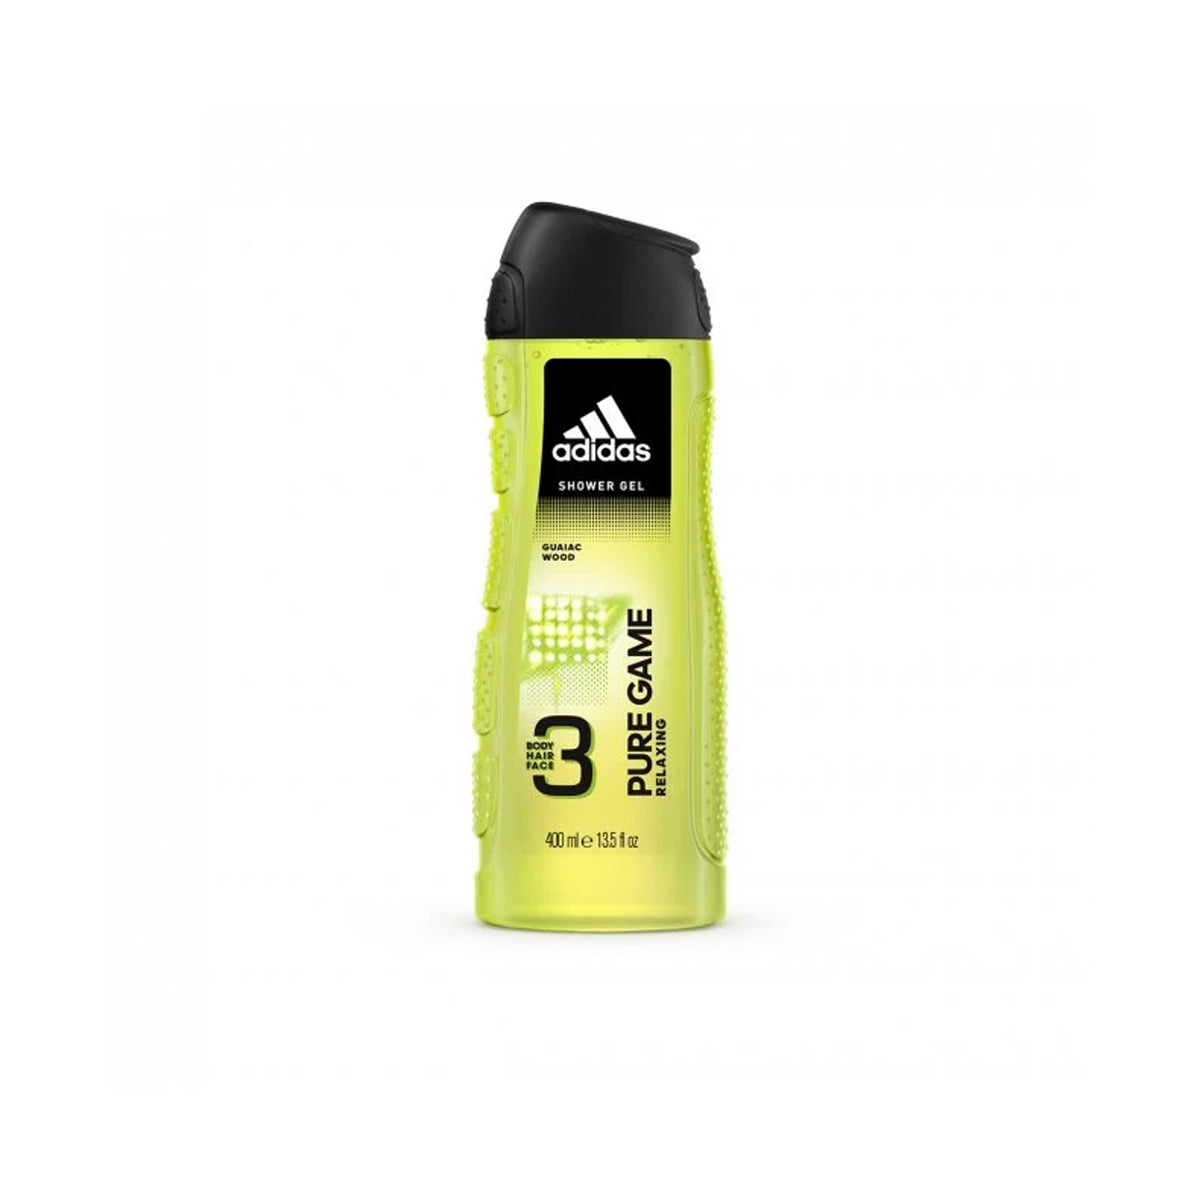 55609 - Adidas Shower Gel 400Ml pure game relaxing